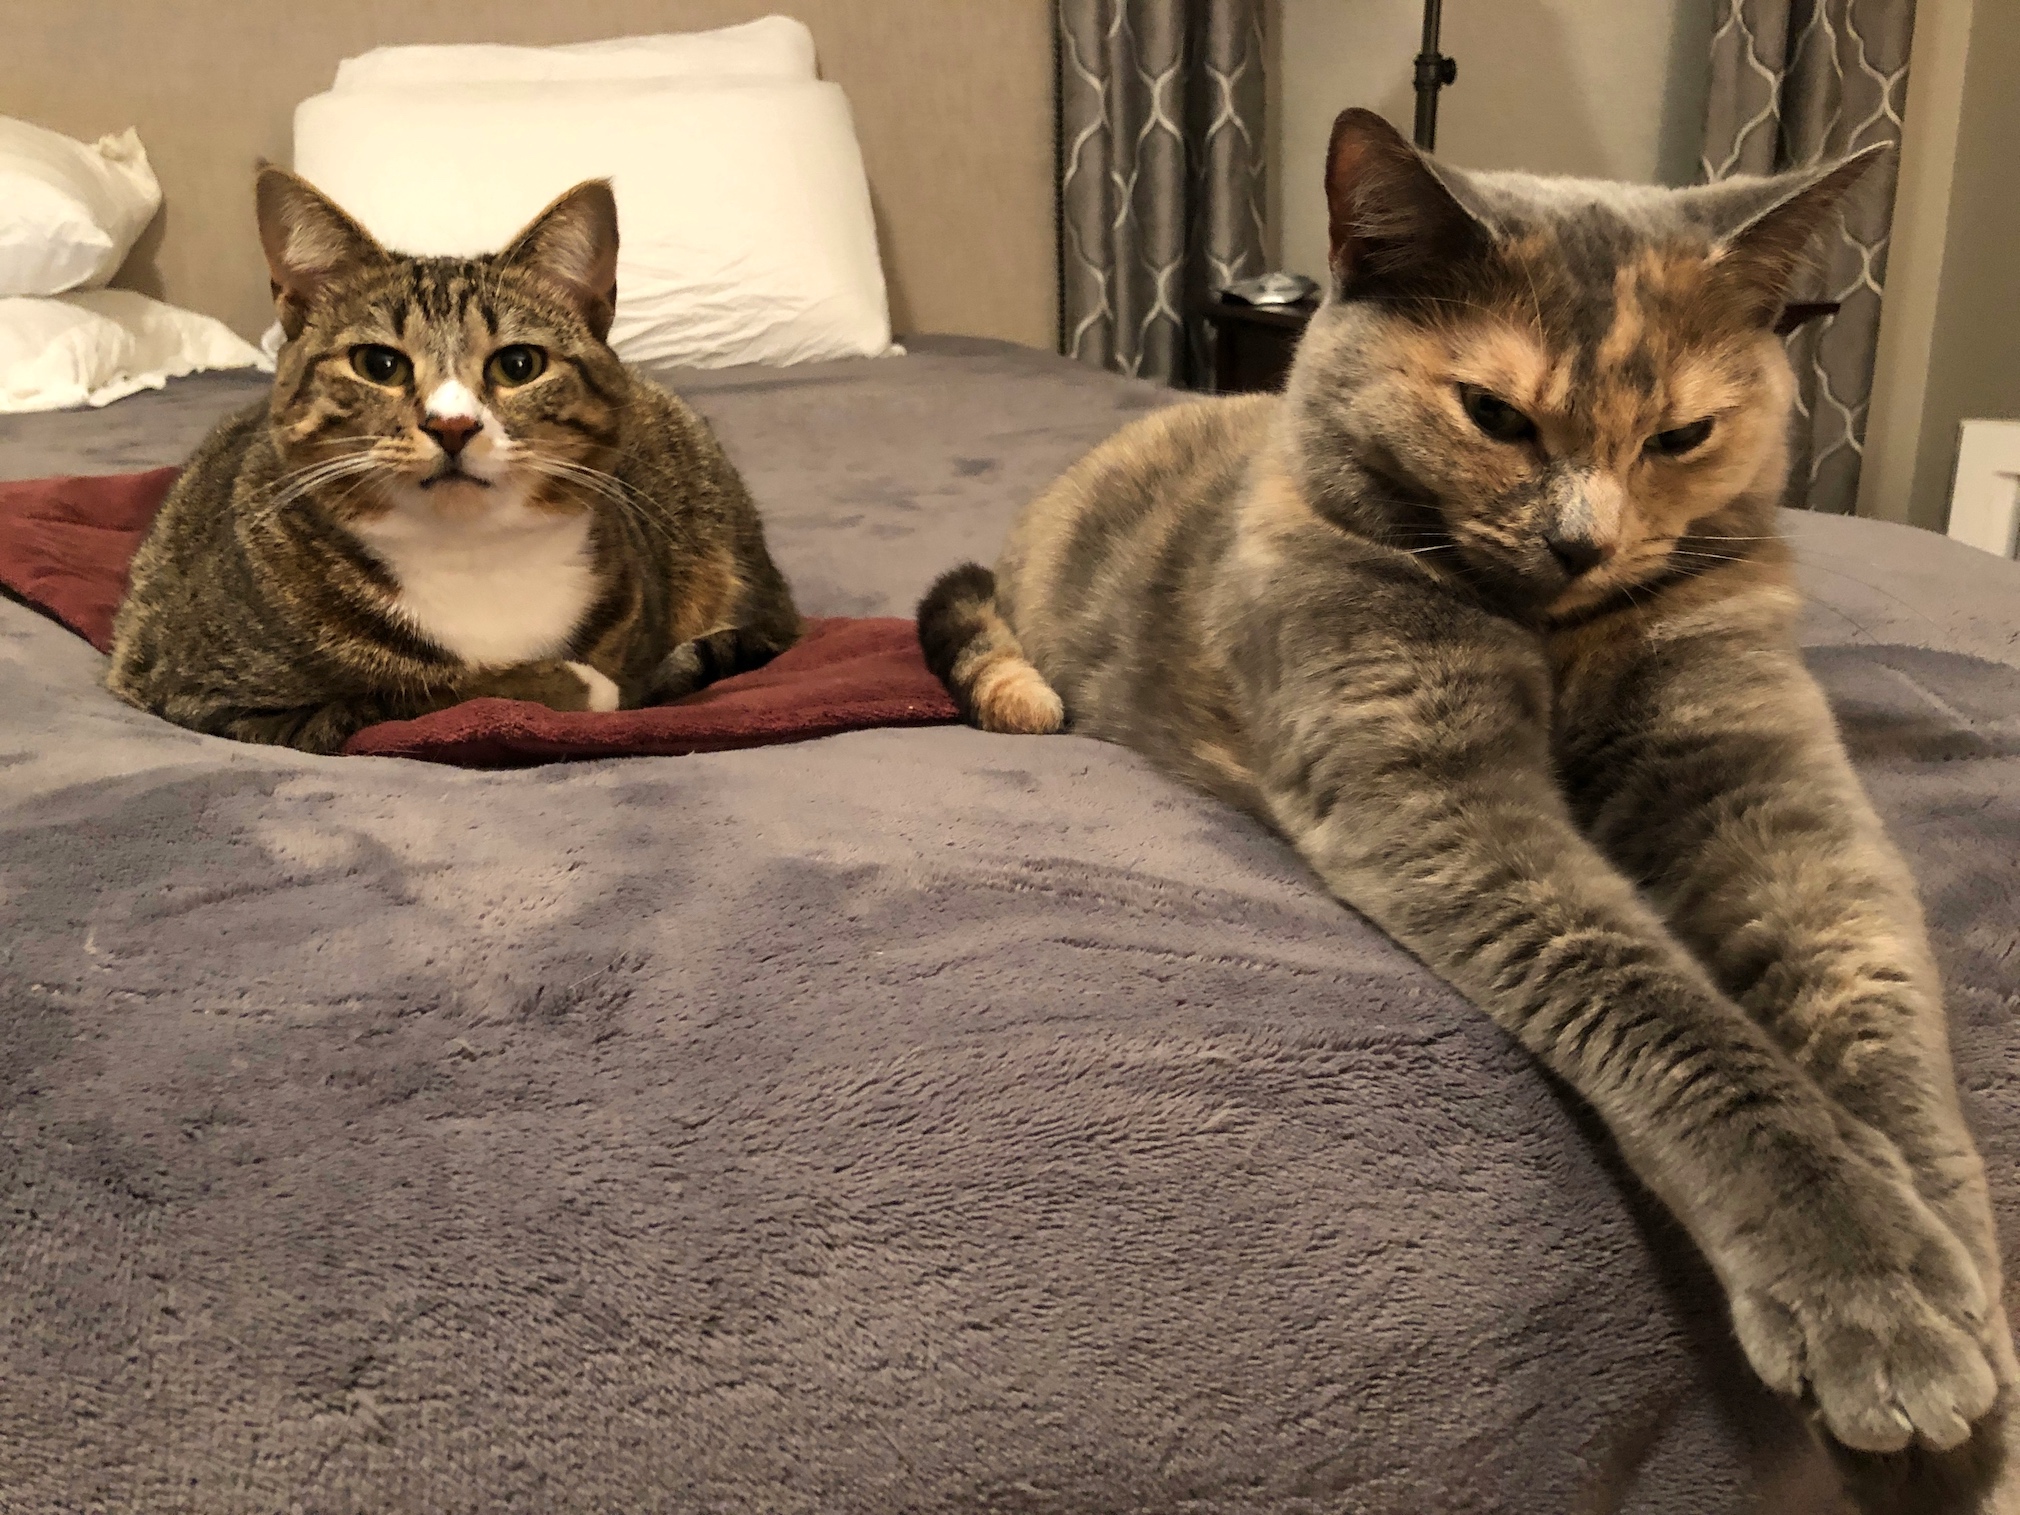 https://www.askamanager.org/wp-content/uploads/2019/09/Sophie-and-Eve-on-bed.jpeg